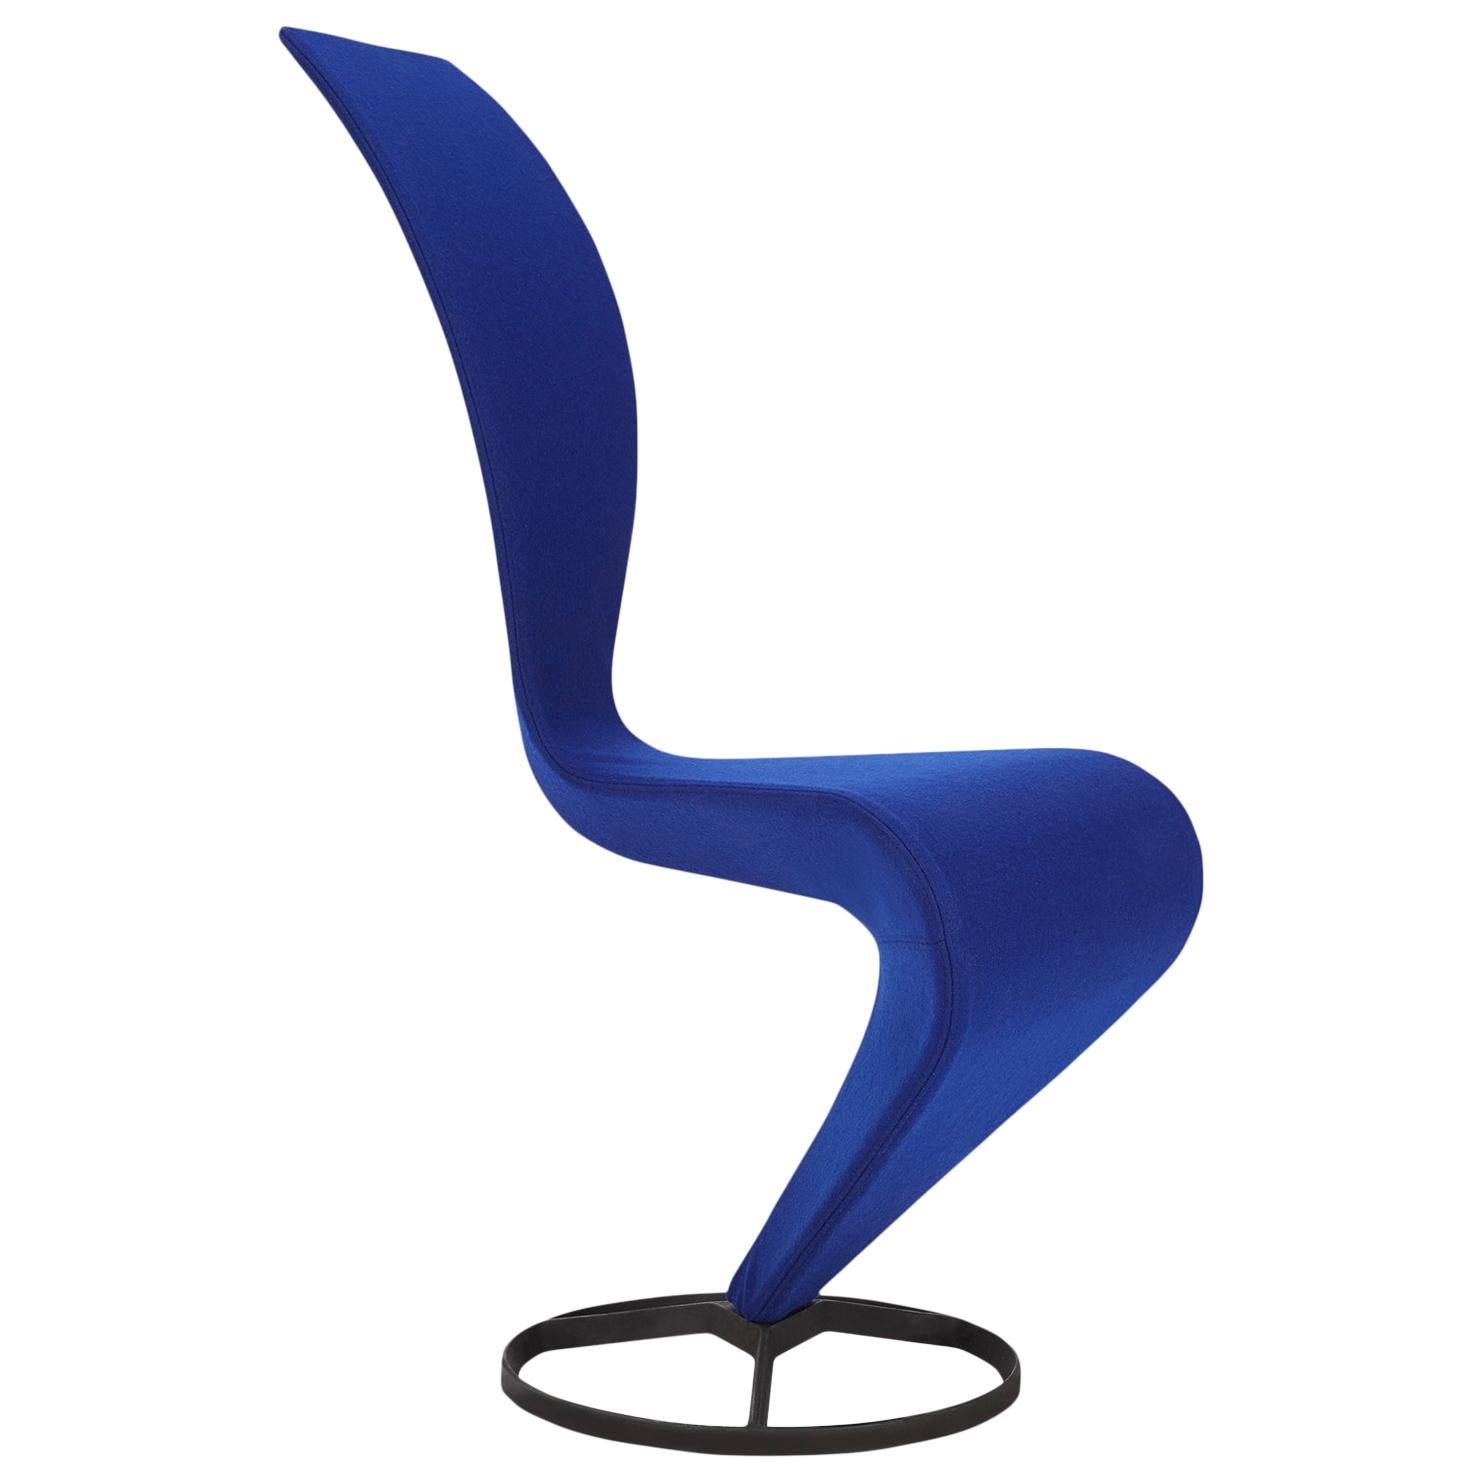 S Chair with Cast Iron Base by Tom Dixon, Blue(HERO.jpg)